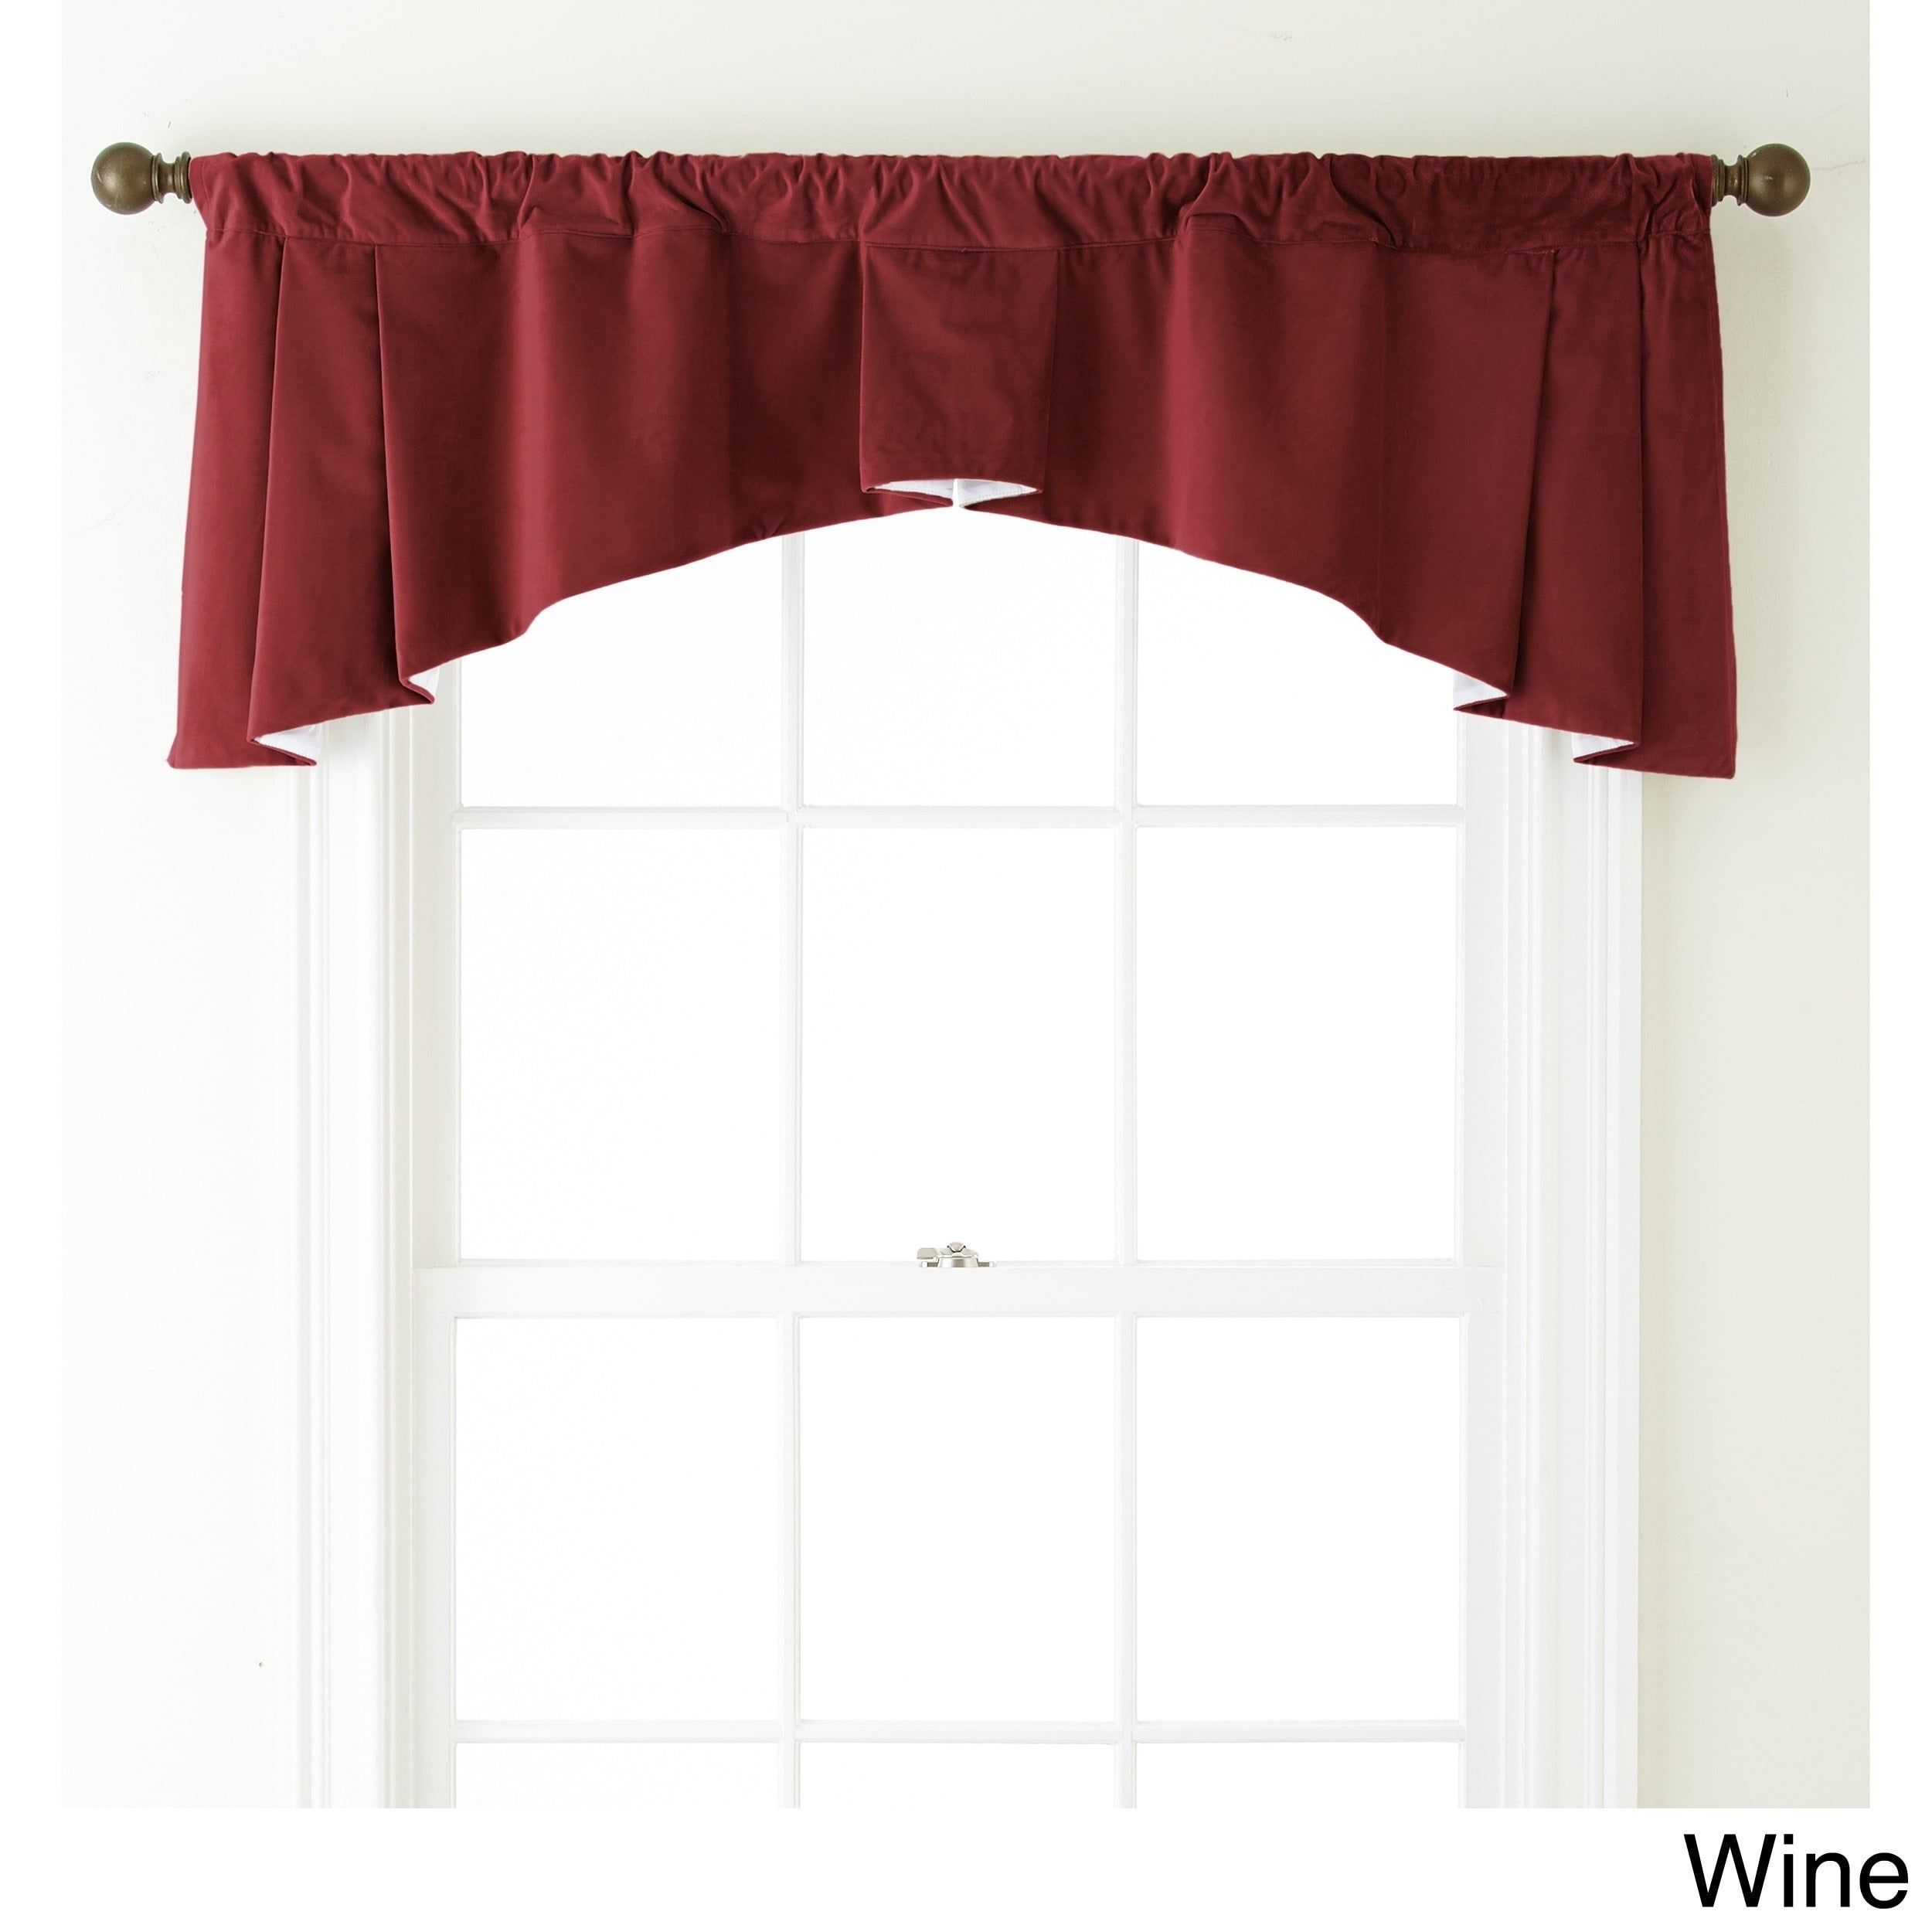 Grand Avenue Remedy 54 X 20 Inch Solid Curtain Valance – 54 X 20 For Flinders Forge 30 Inch Tiers In Garnet (View 8 of 20)